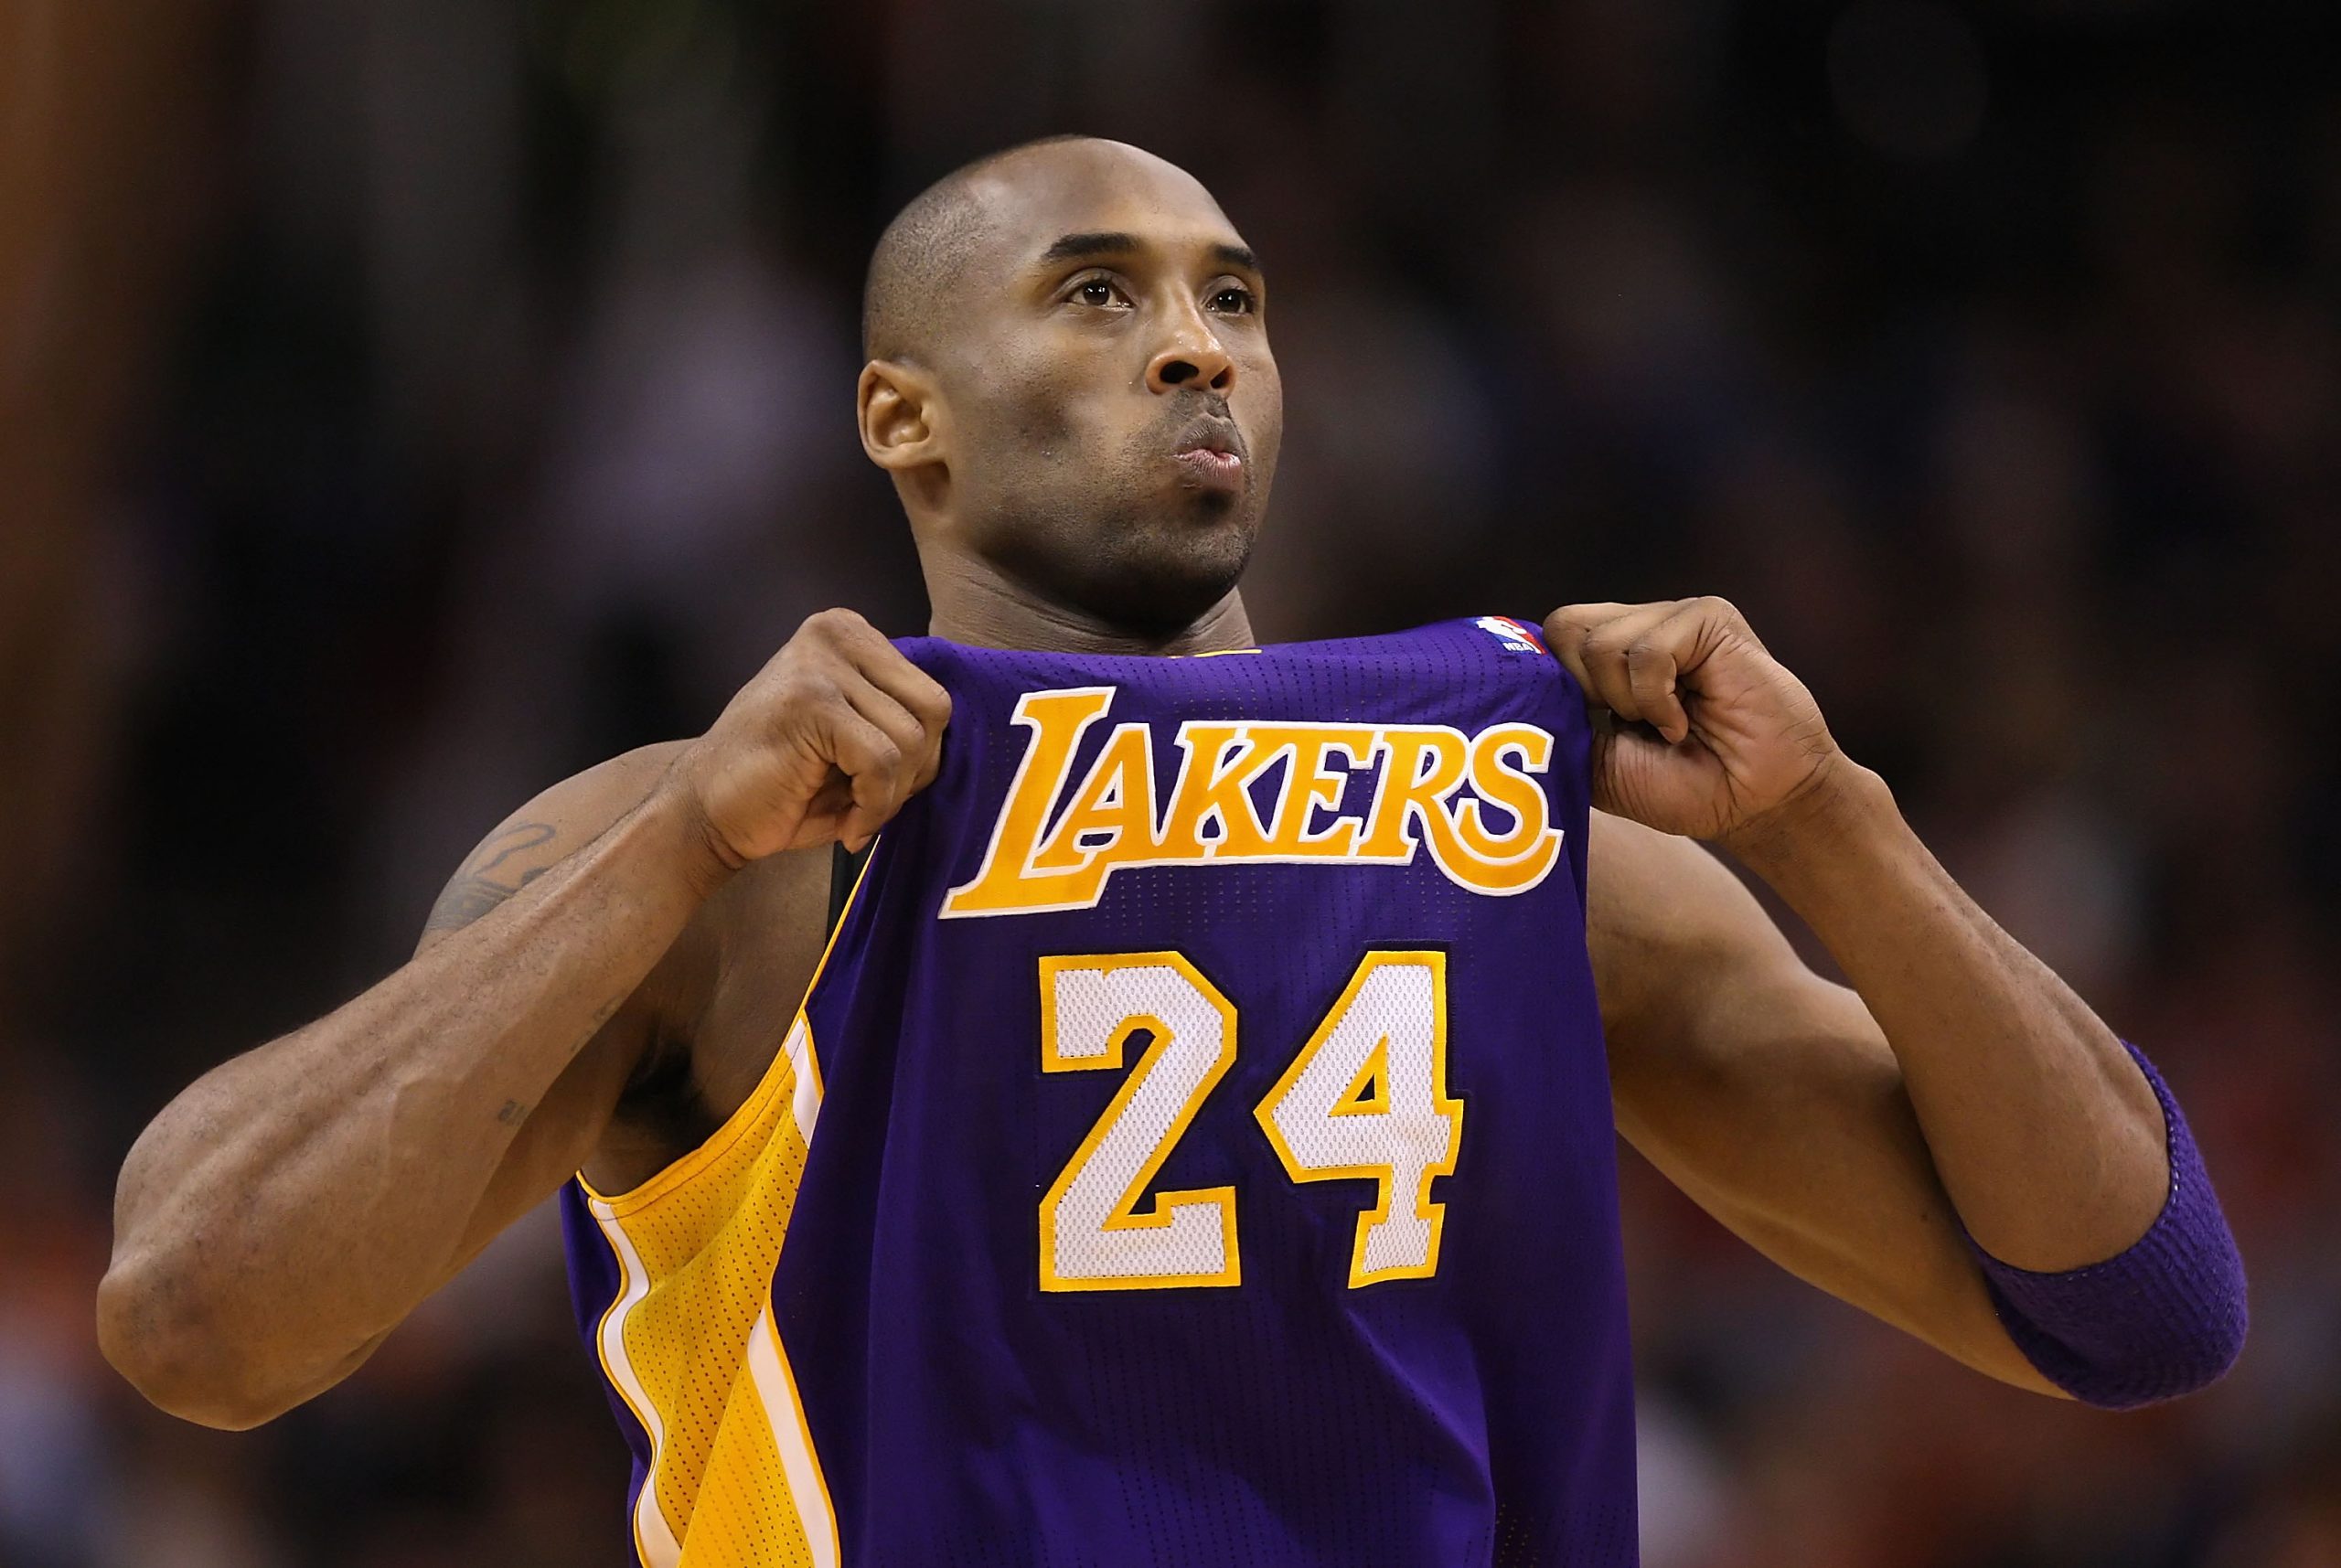 Kobe Bryant of the Los Angeles Lakers adjusts his jersey during the NBA game.